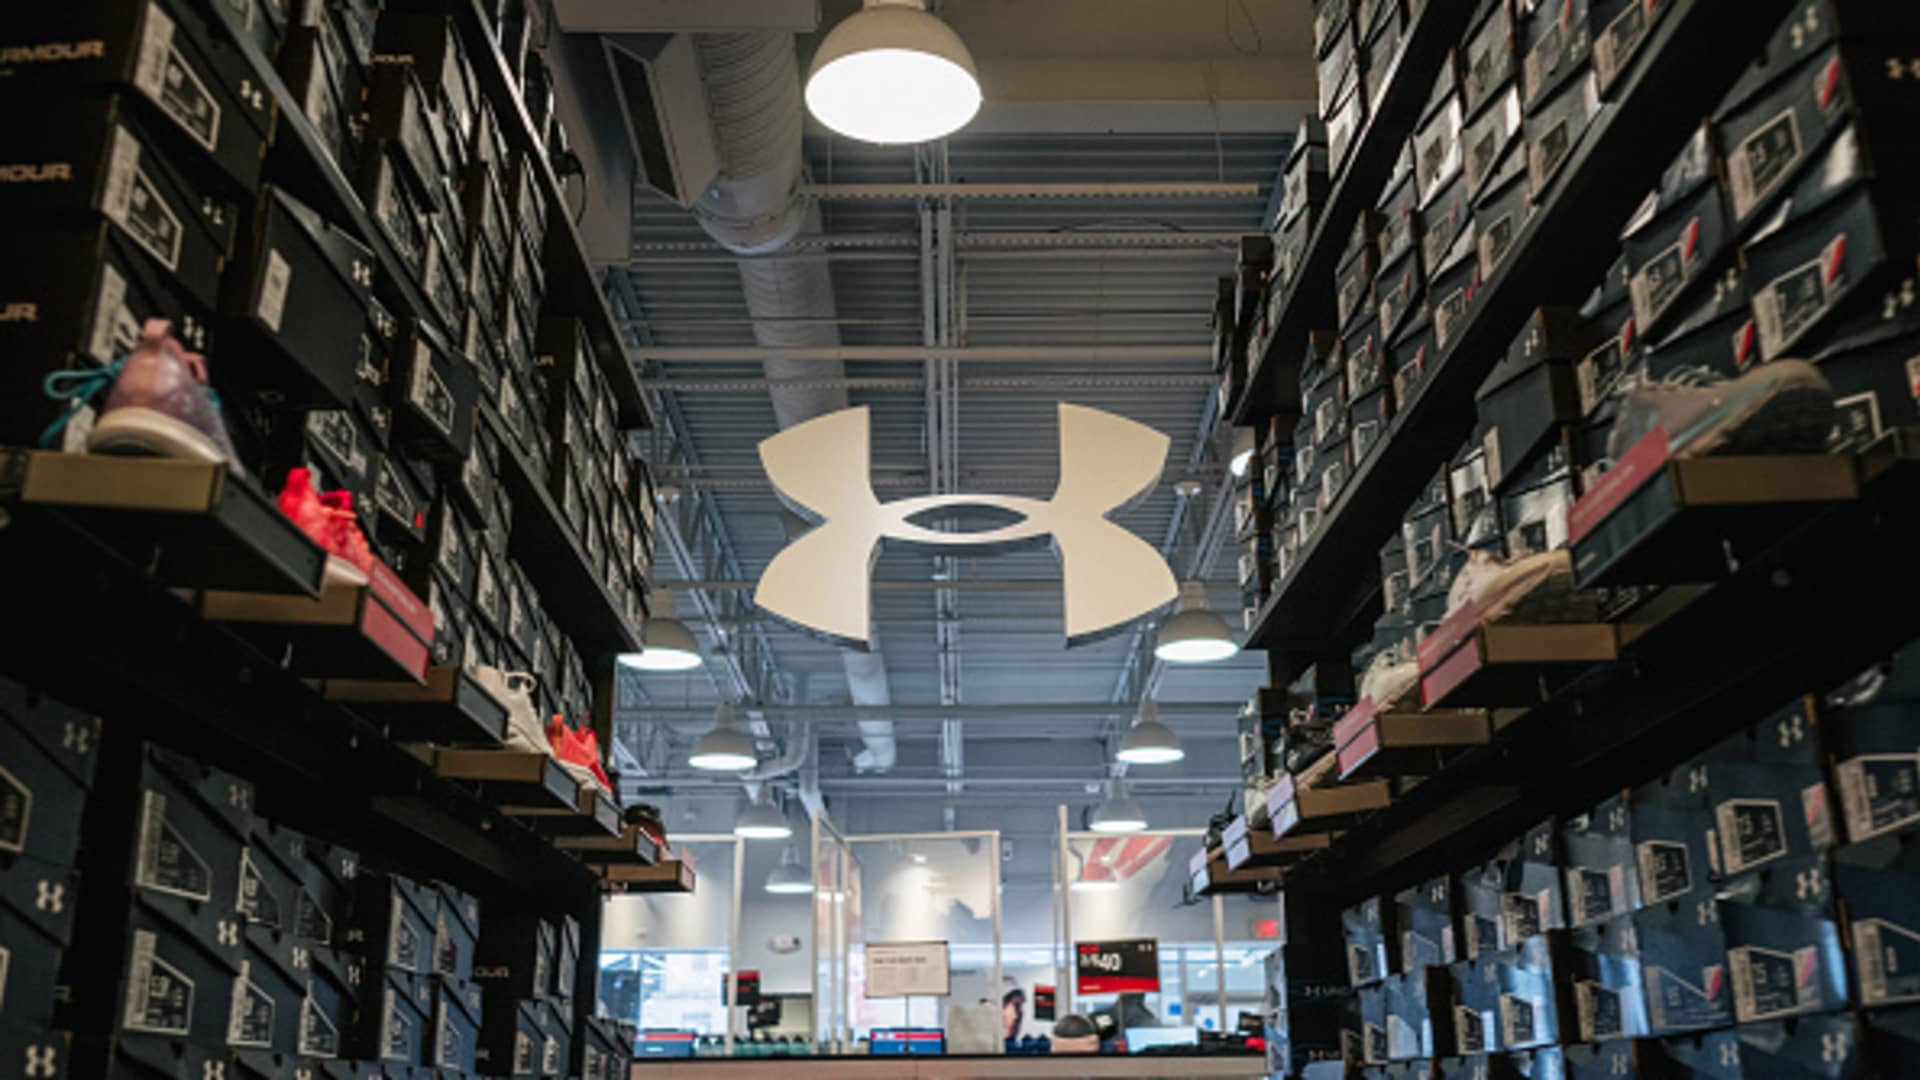 The interior of an Under Armour store is seen on November 03, 2021 in Houston, Texas.